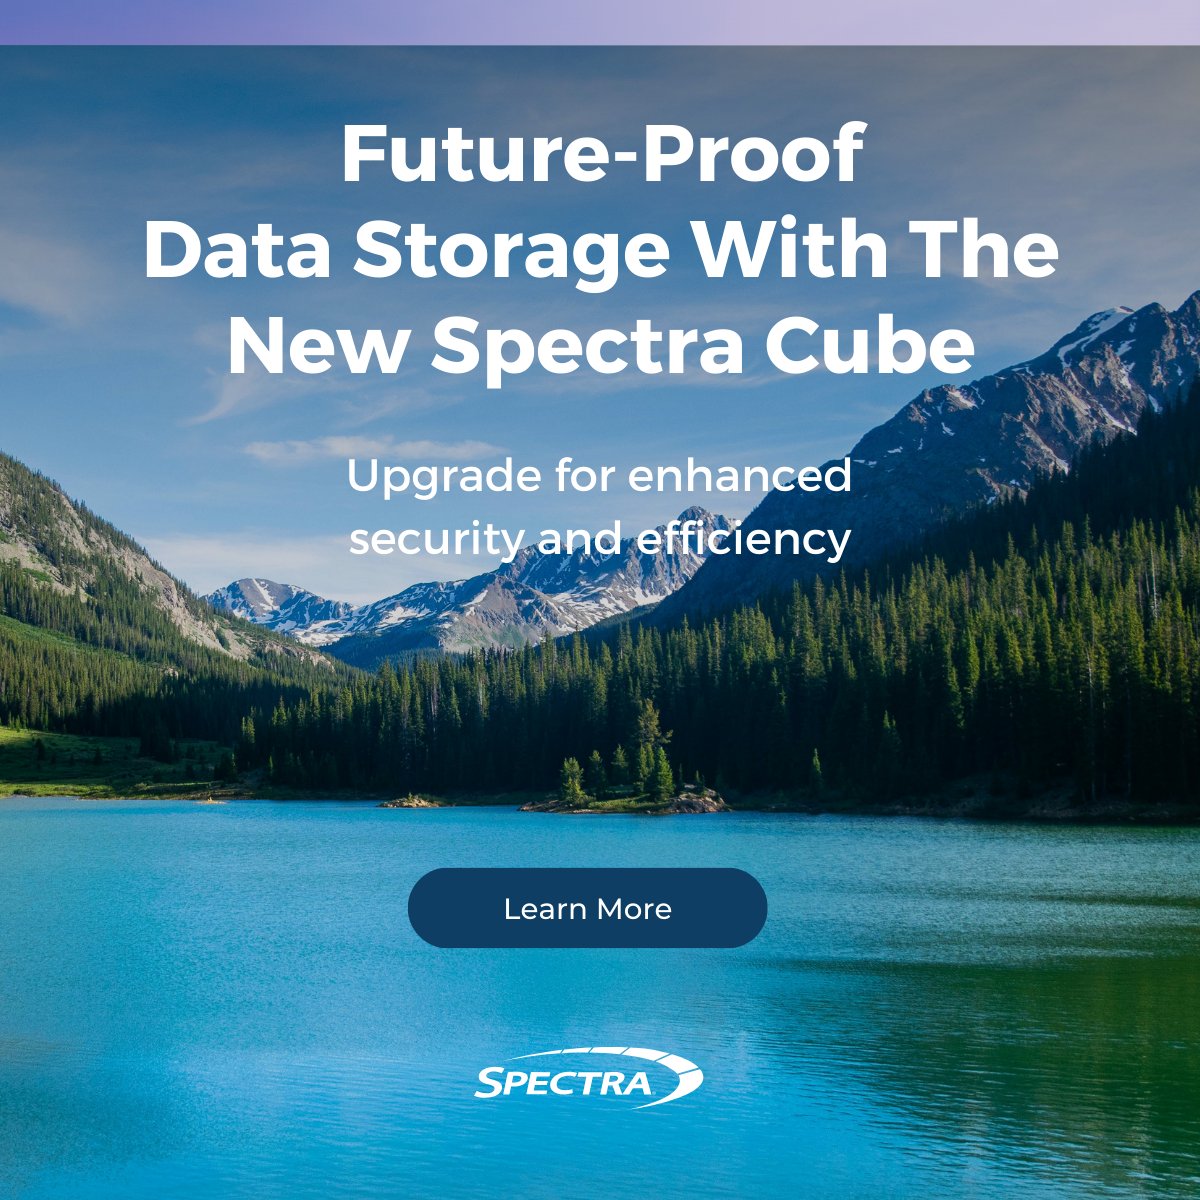 Future-proof long-term data storage with Spectra Cube! Effortlessly scale, fortify against cyber threats, and simplify management with LumOS UI. Upgrade now for enhanced security and efficiency! #TapeStorage #DataSecurity sl.spectralogic.com/3Qotmbk